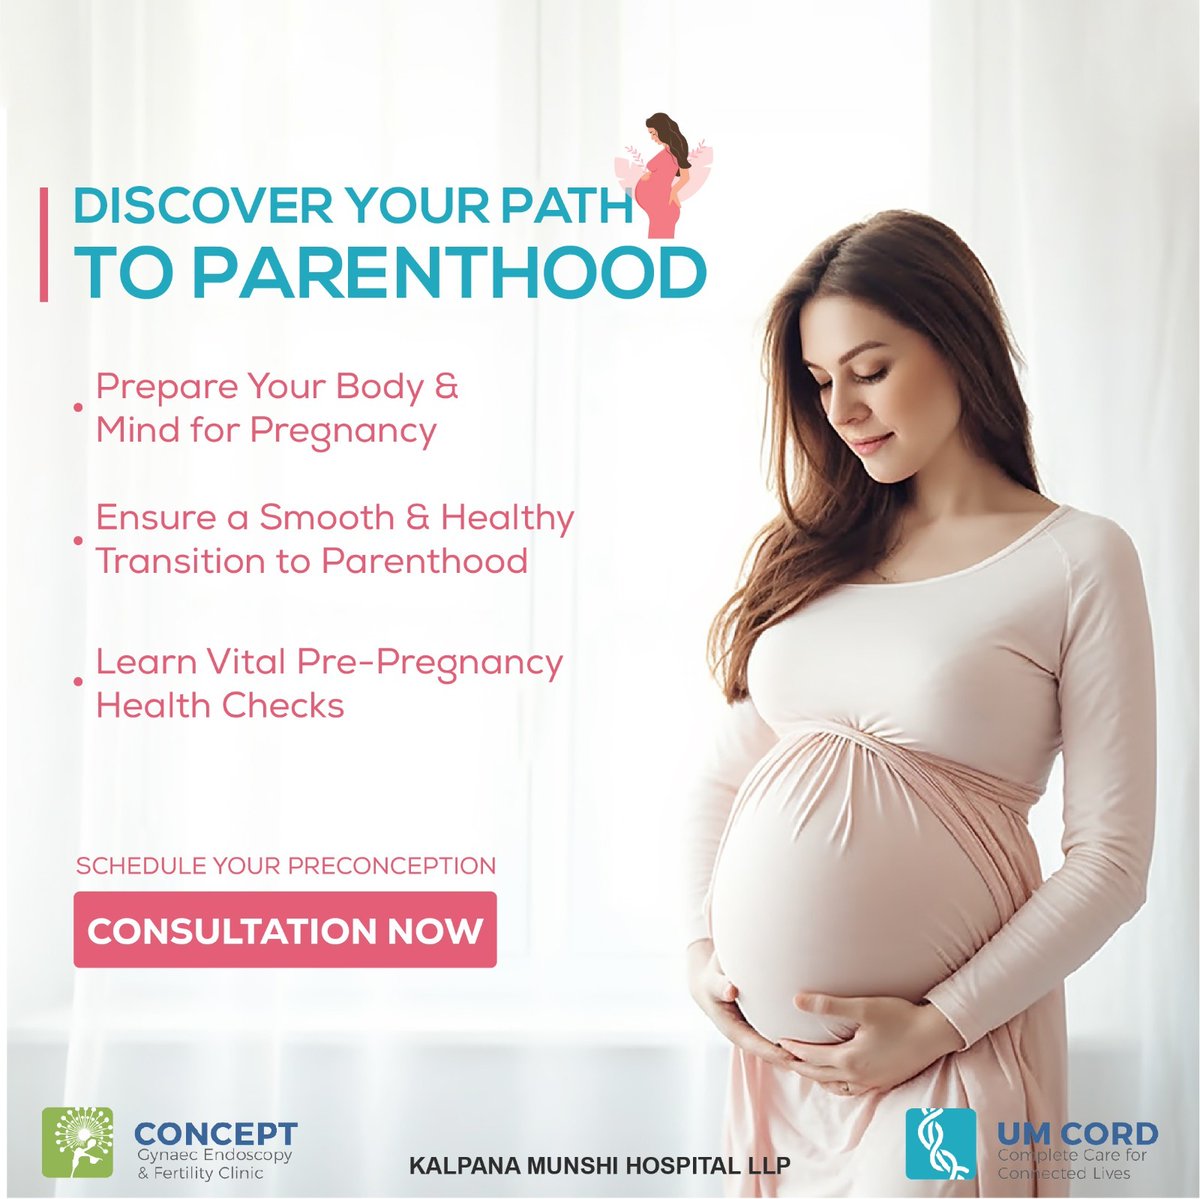 Kalpana Munshi Hospital is your partner in parenthood. Discover the essential steps to prepare your mind and body for pregnancy. 

Schedule your preconception consultaion now

#kalpanamunshihospital #healthyliving #hospitalsofahmedabad #womenshealthmatters #gynaecology